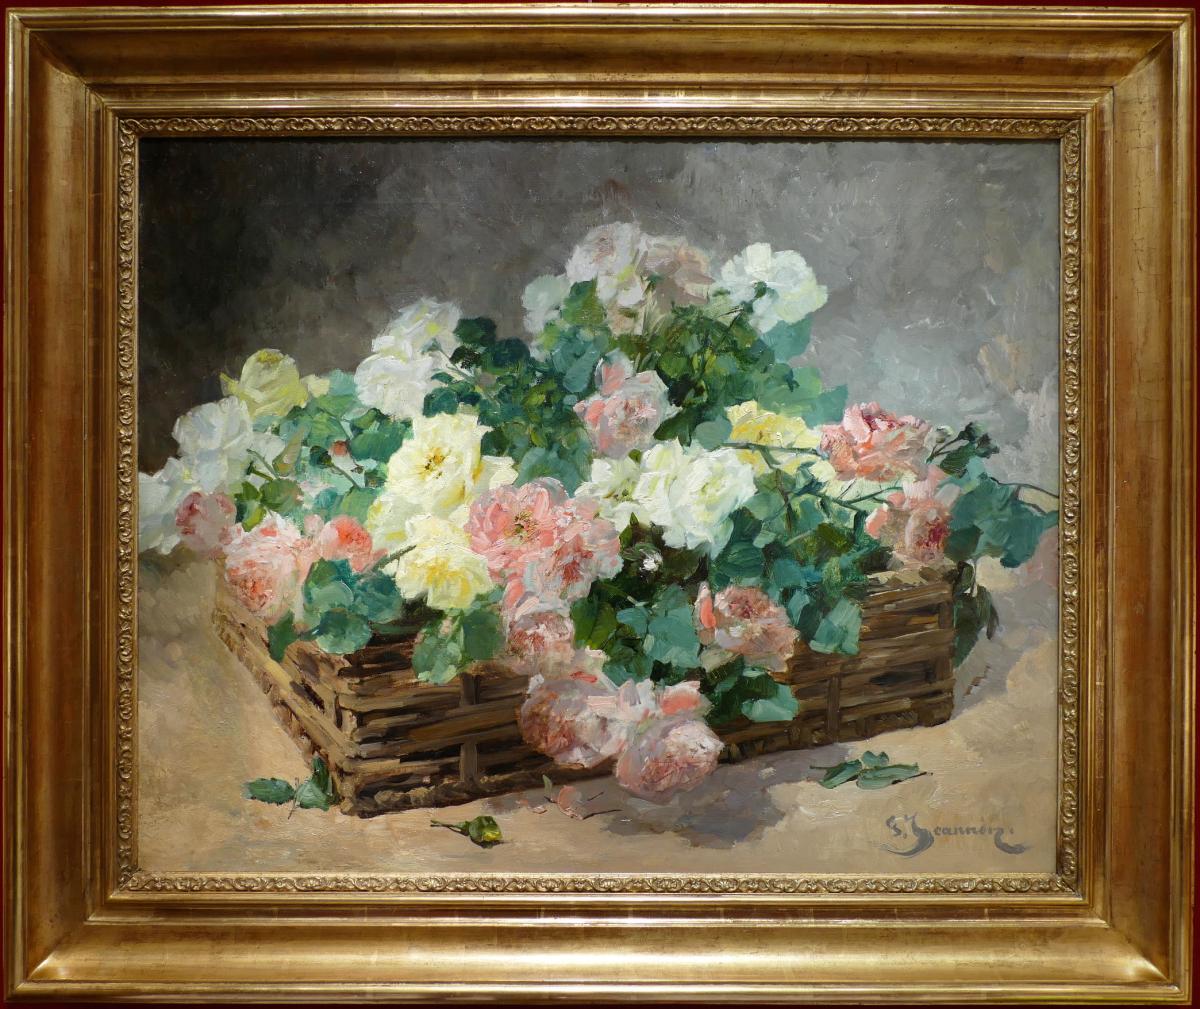 Jeannin Georges French Painting 19th Century Basket Of Roses Oil On Canvas Signed